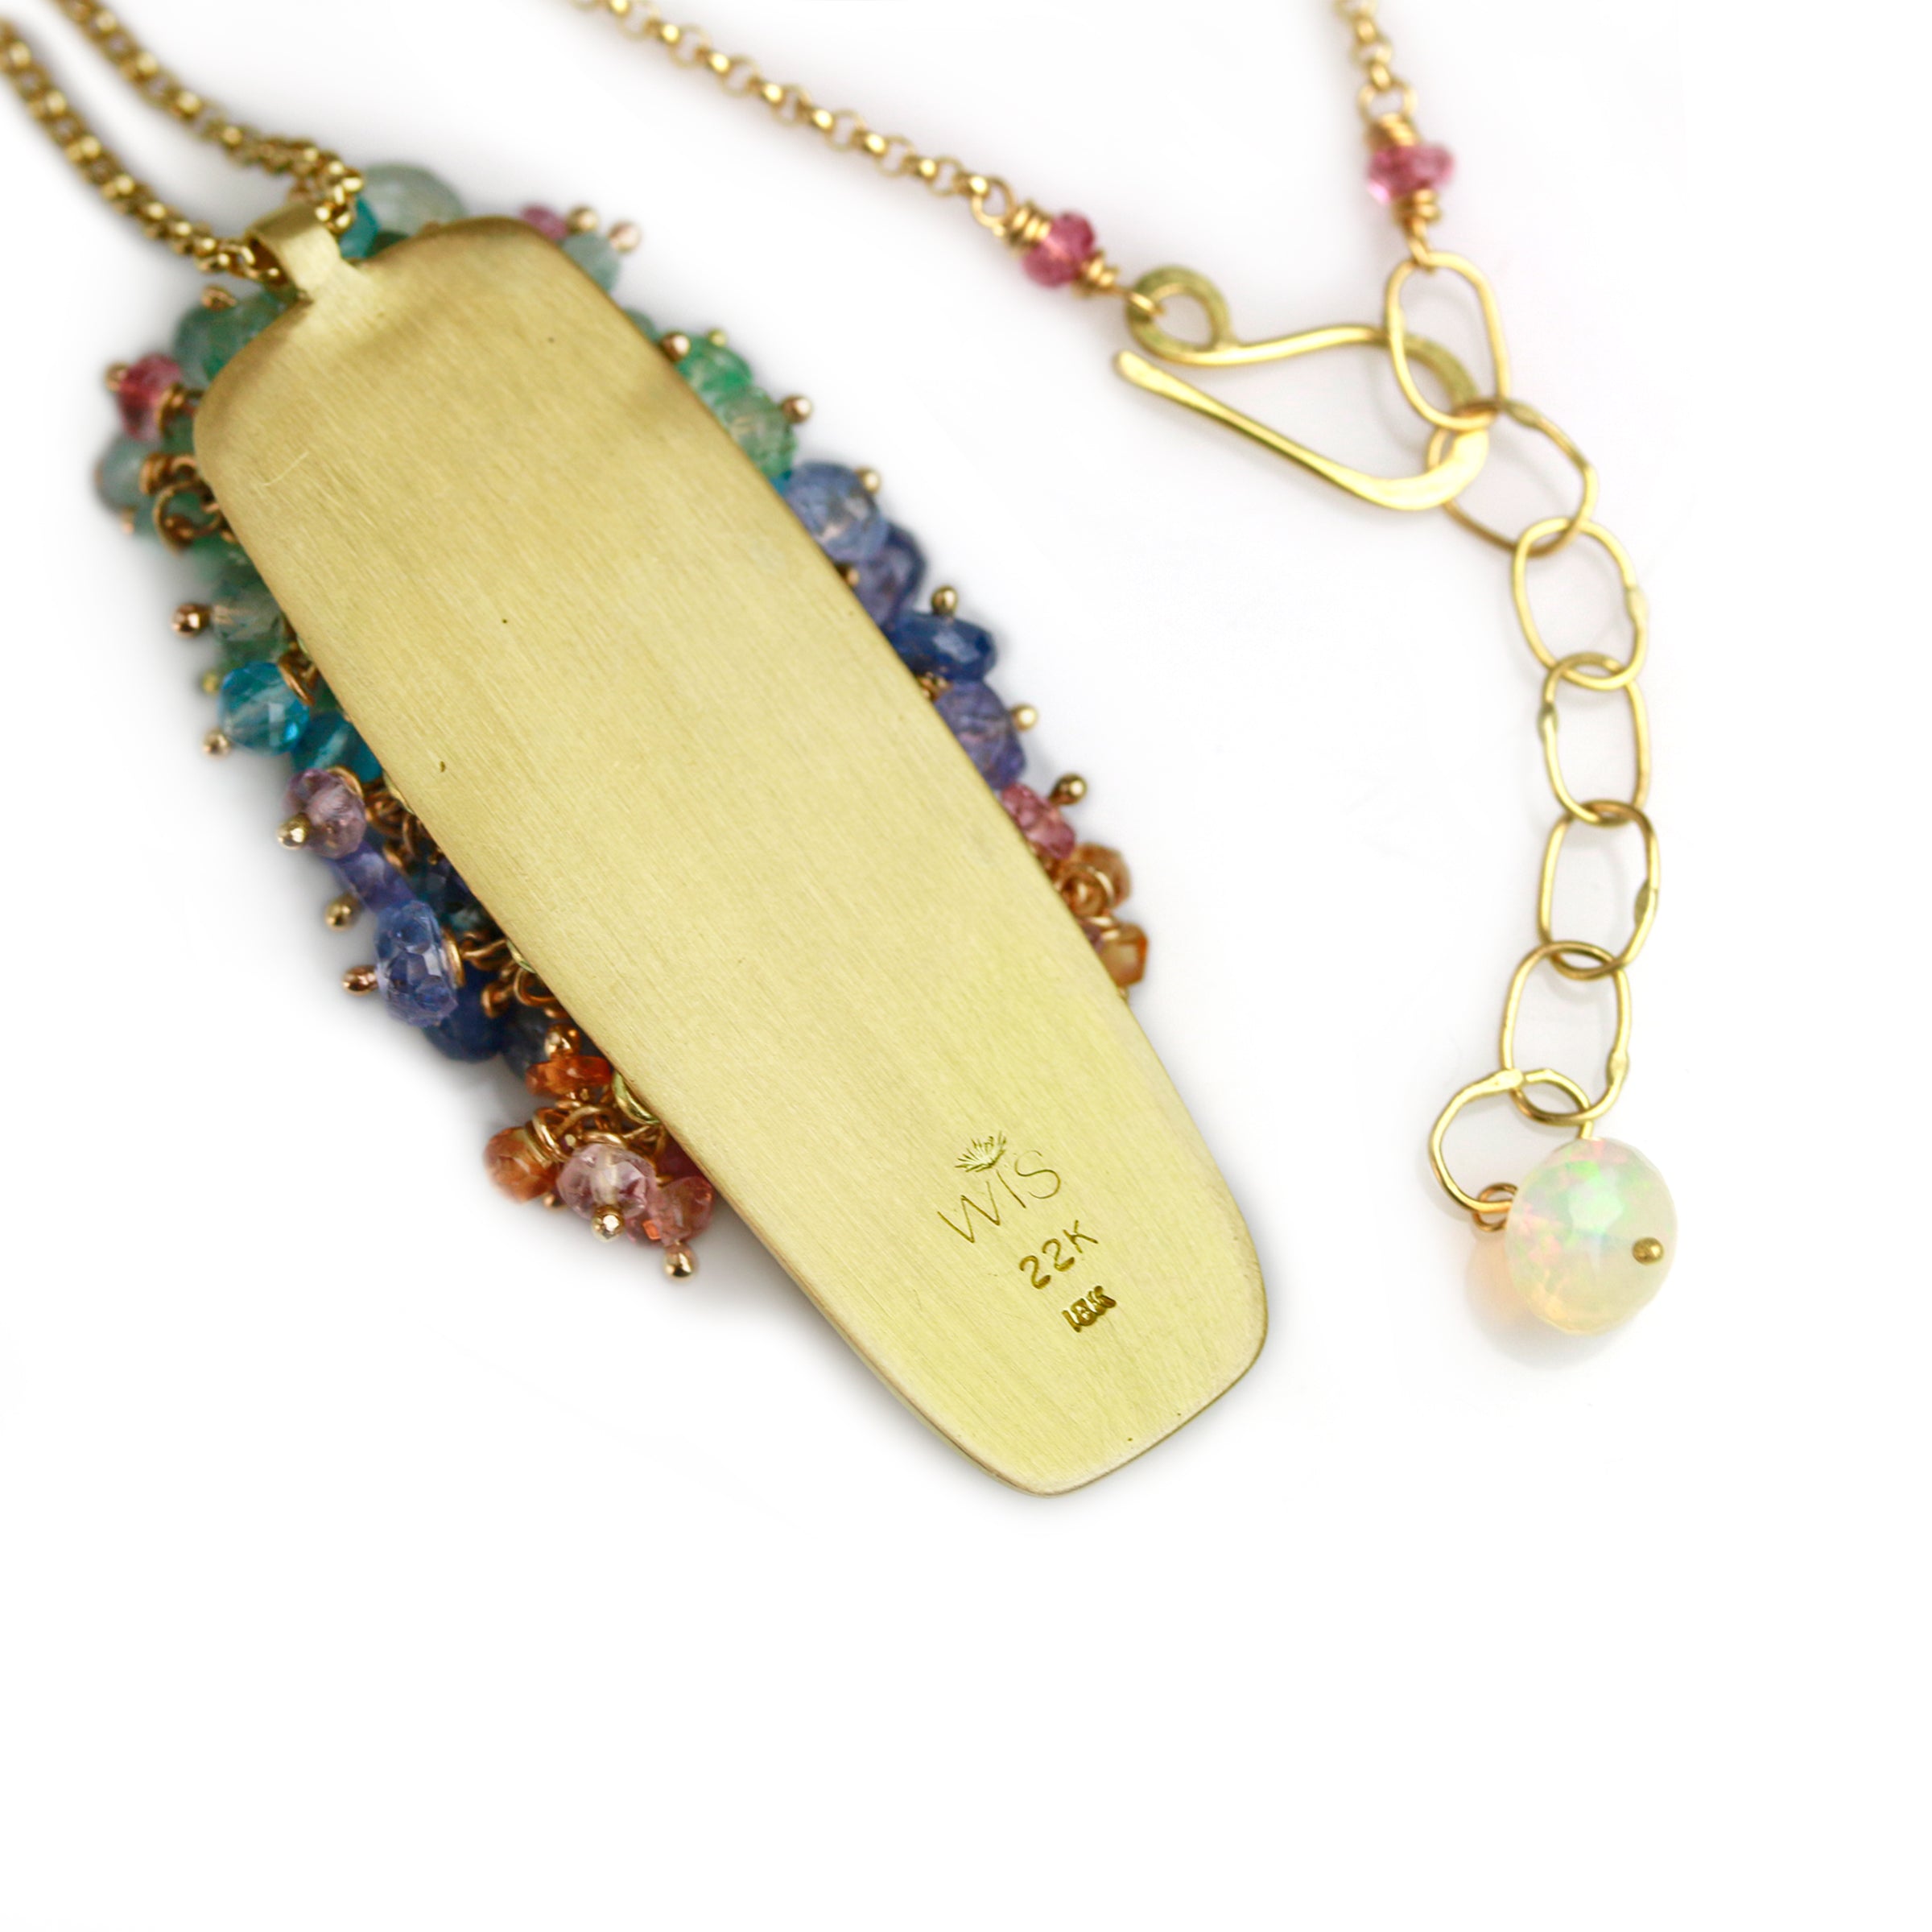 Sold! Long Queensland Pipe Opal Pendant with Fringe. 22k and 18k Gold.